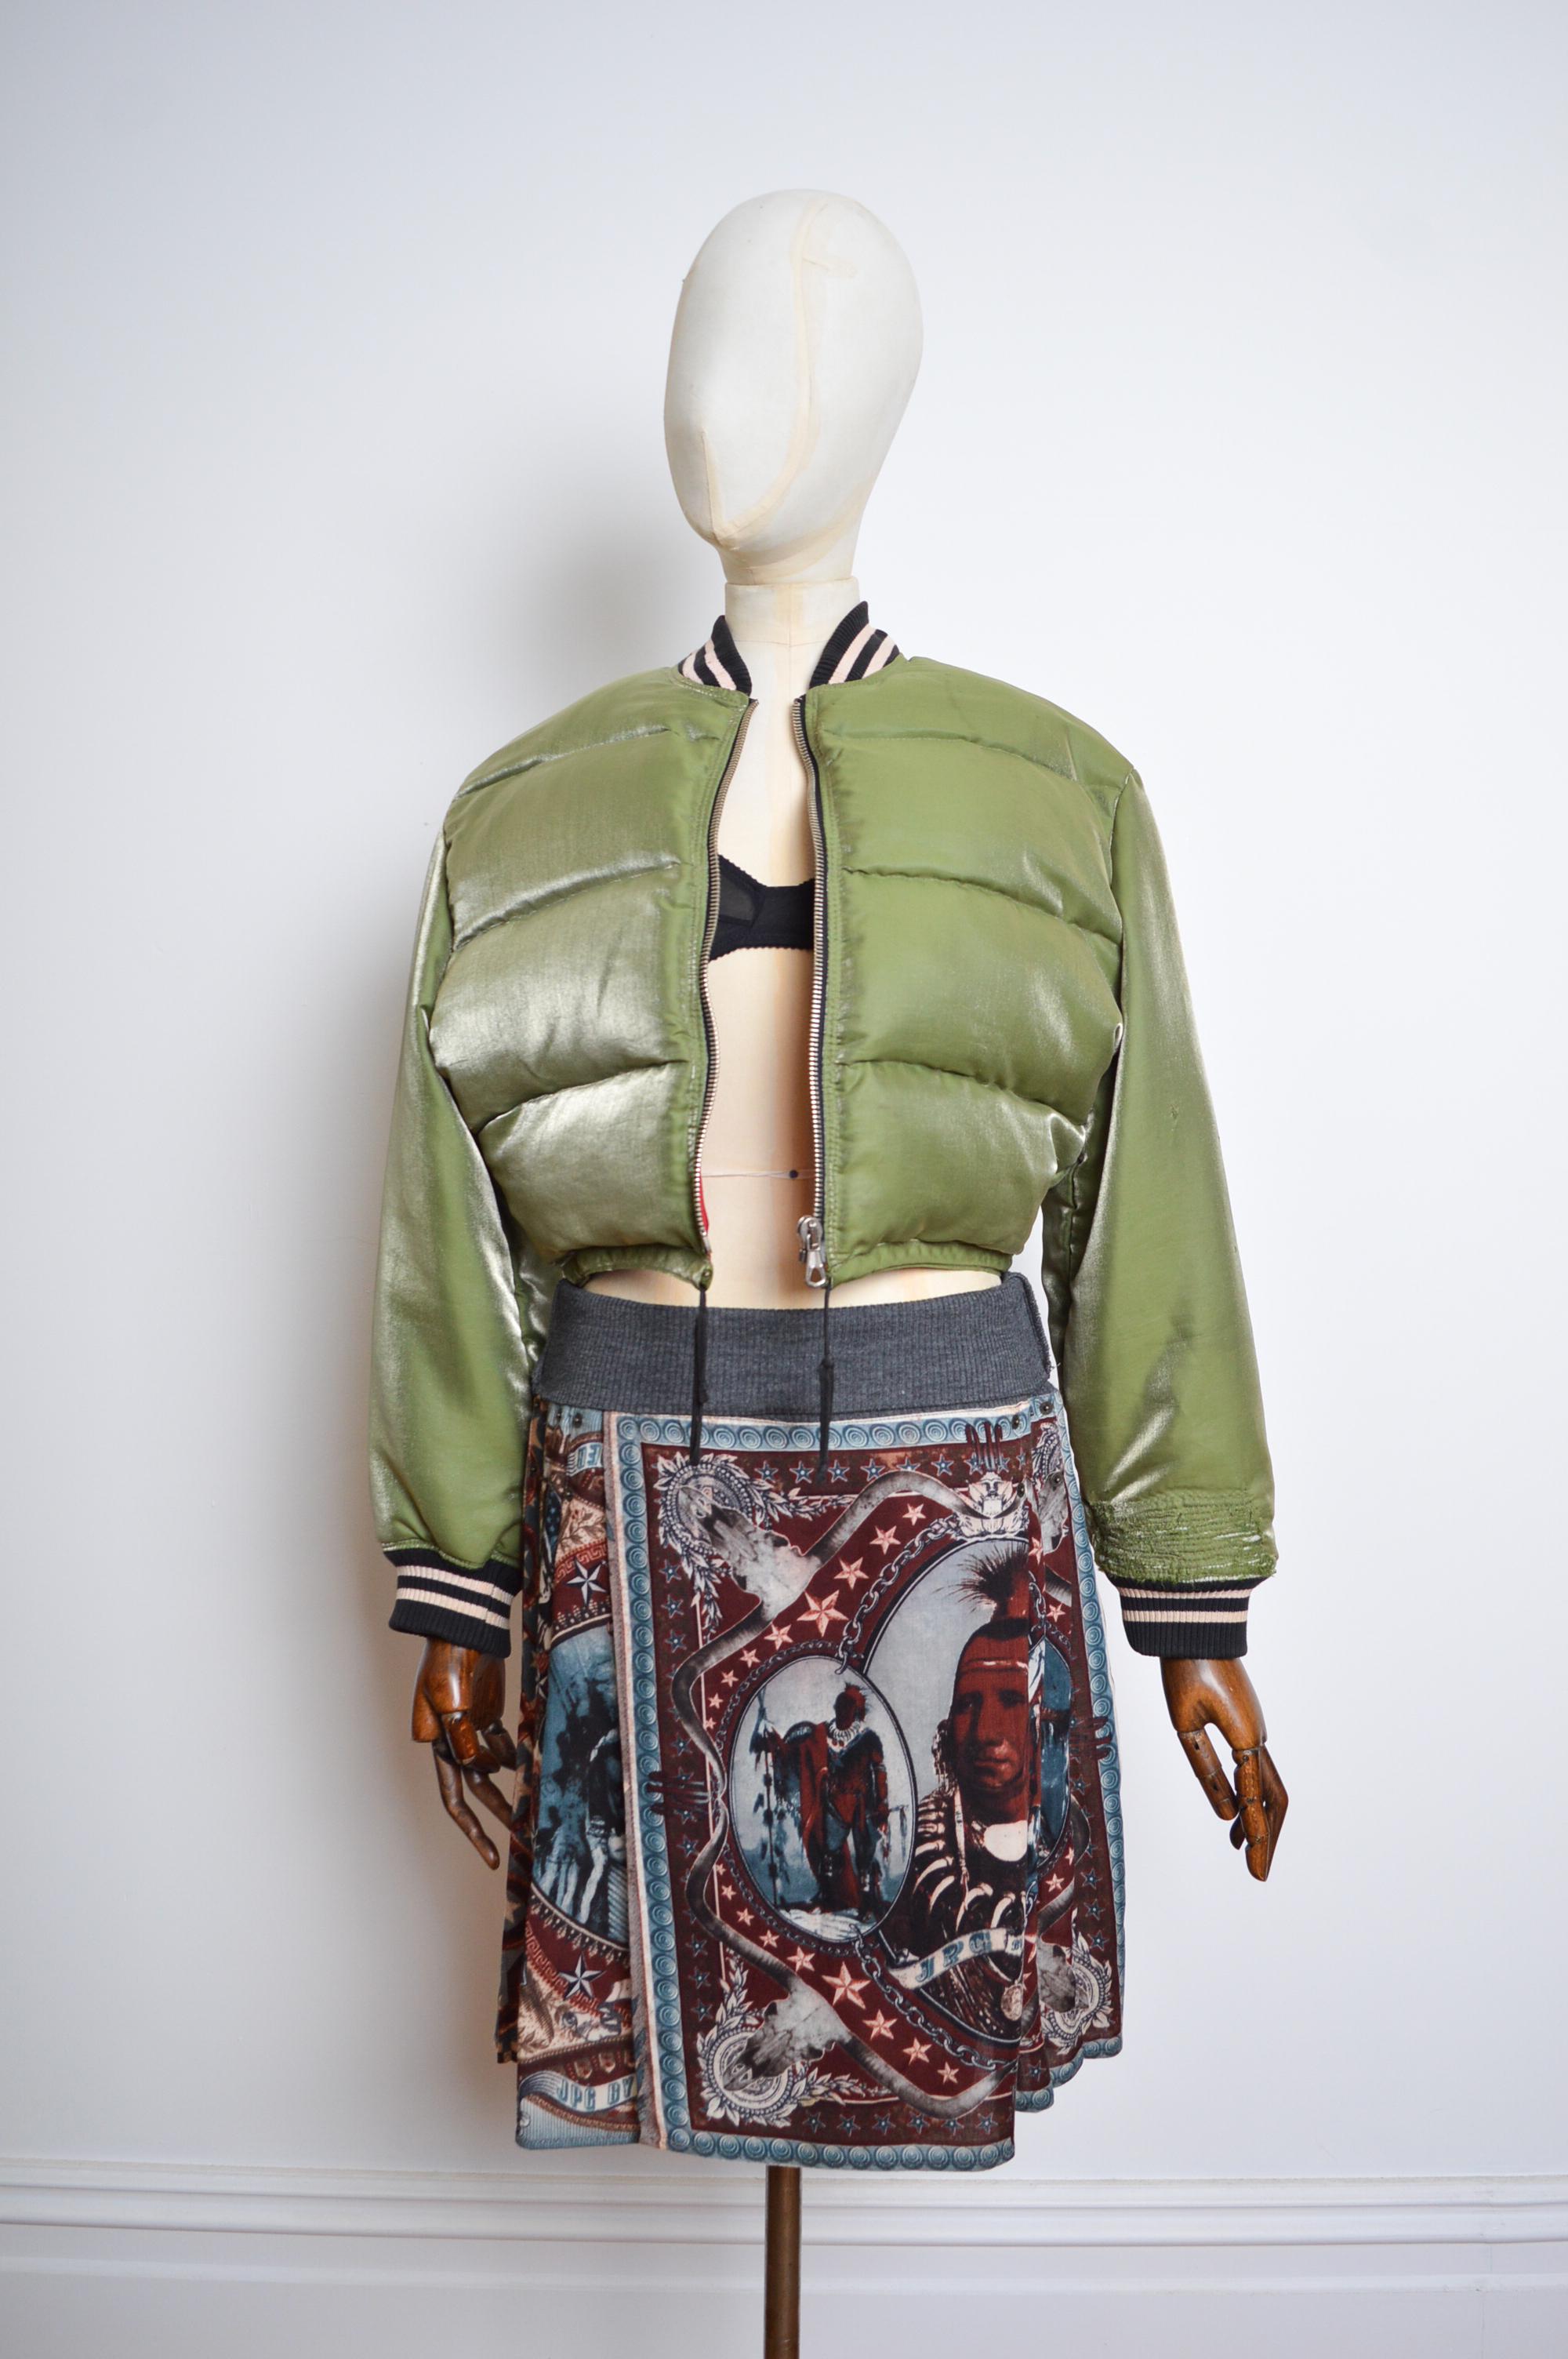 Superb 1990's Vintage Cropped MA1 style military, Khaki green bomber jacket by Jean Paul Gaultier, with a Detachable hood bonnet detail.

Features;
Contrast knitted jersey cuffs & Collar
Red acetate interior lining
Draw tie waist line
Central line